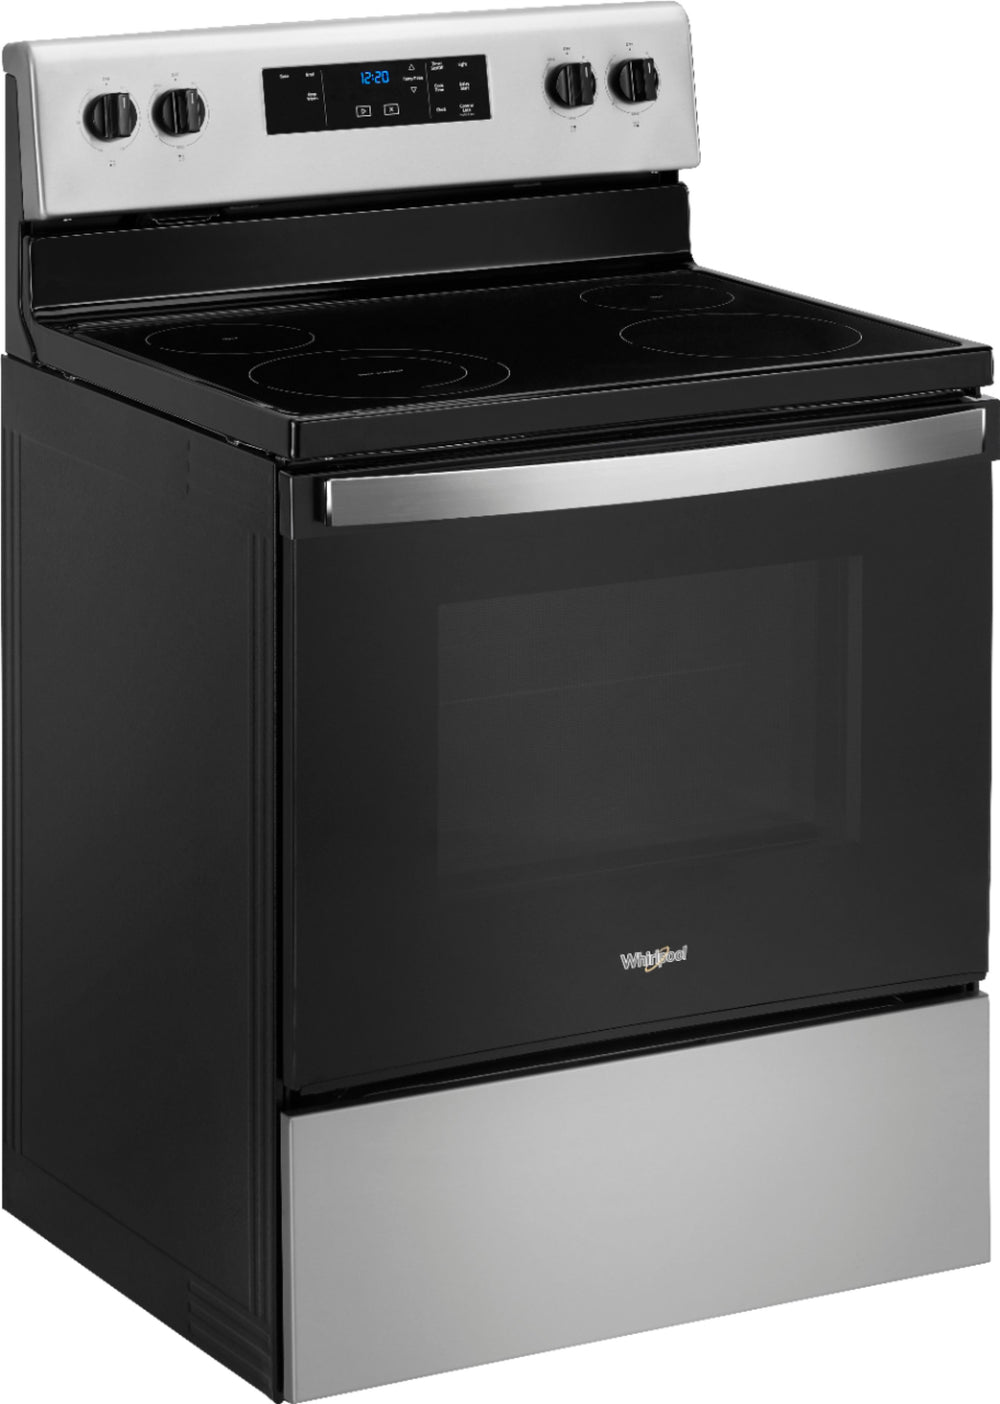 Whirlpool - 5.3 Cu. Ft. Freestanding Electric Range with Keep Warm Setting - Stainless steel_1